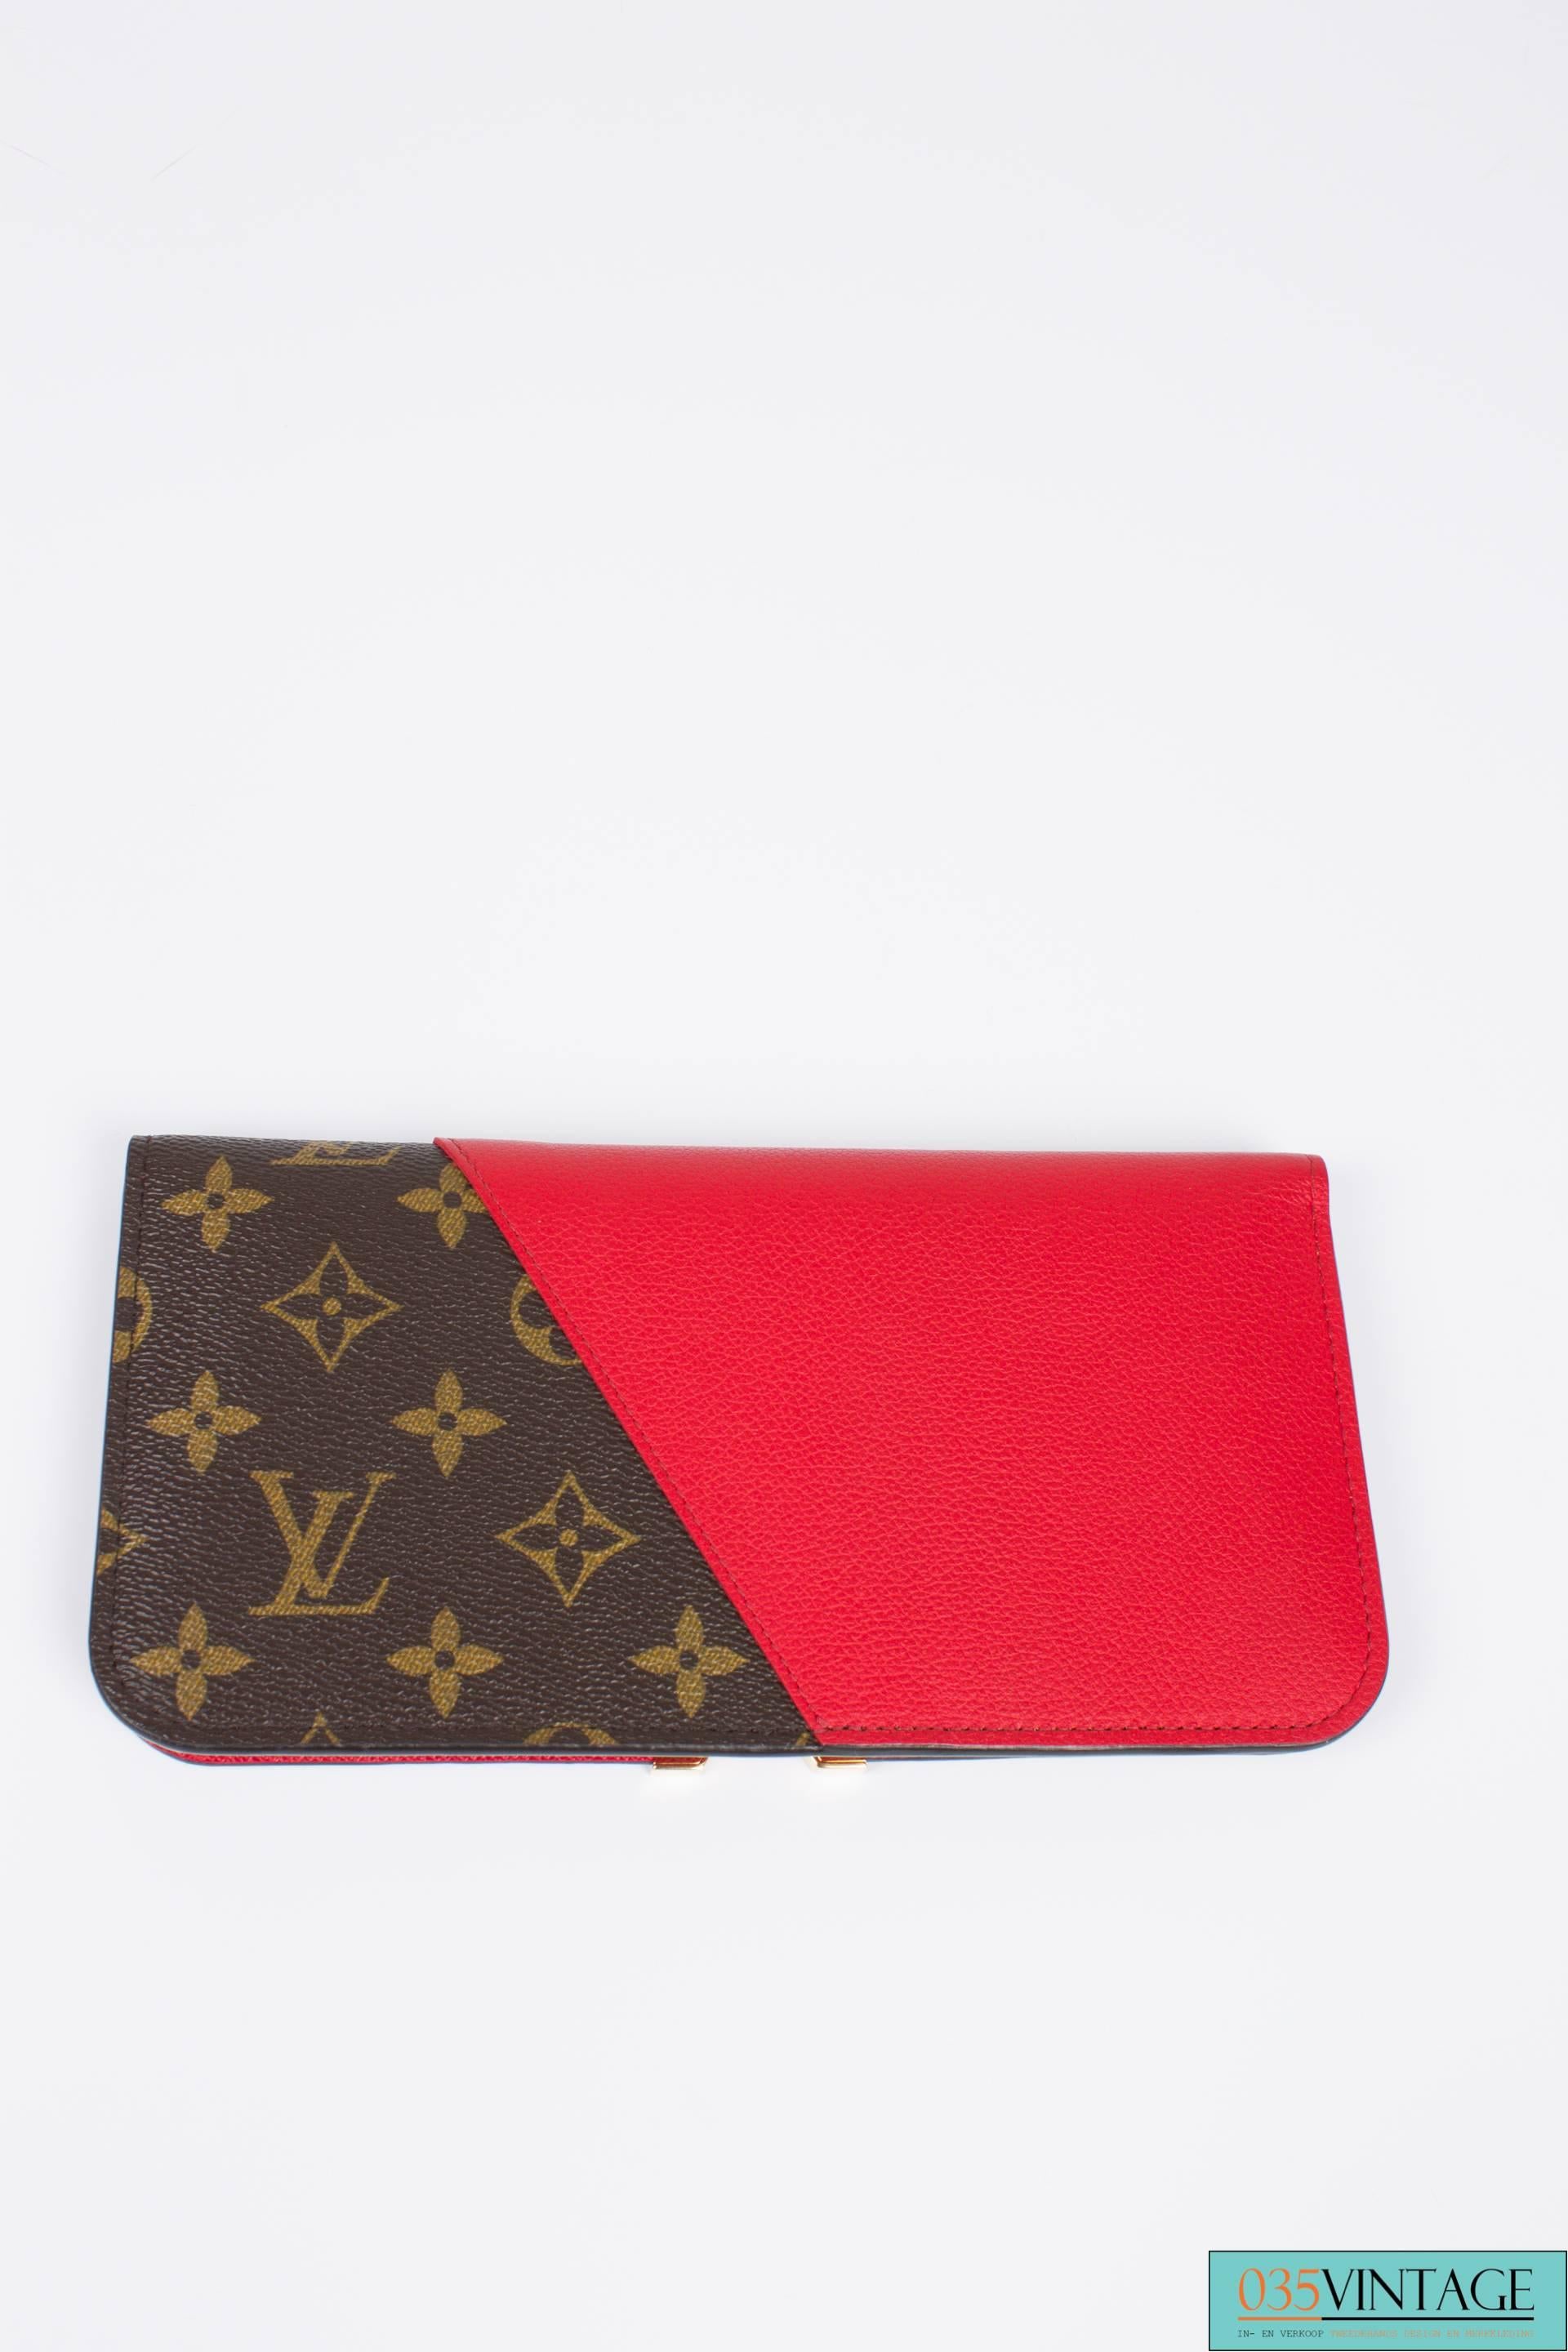 This is the Louis Vuitton Kimono Wallet, and it's marvellous!

The iconic brown LV monogram canvas is combined with red calfskin leather. A large golden metal V in the center. Closure with two little push button.

On the inside this wallet is